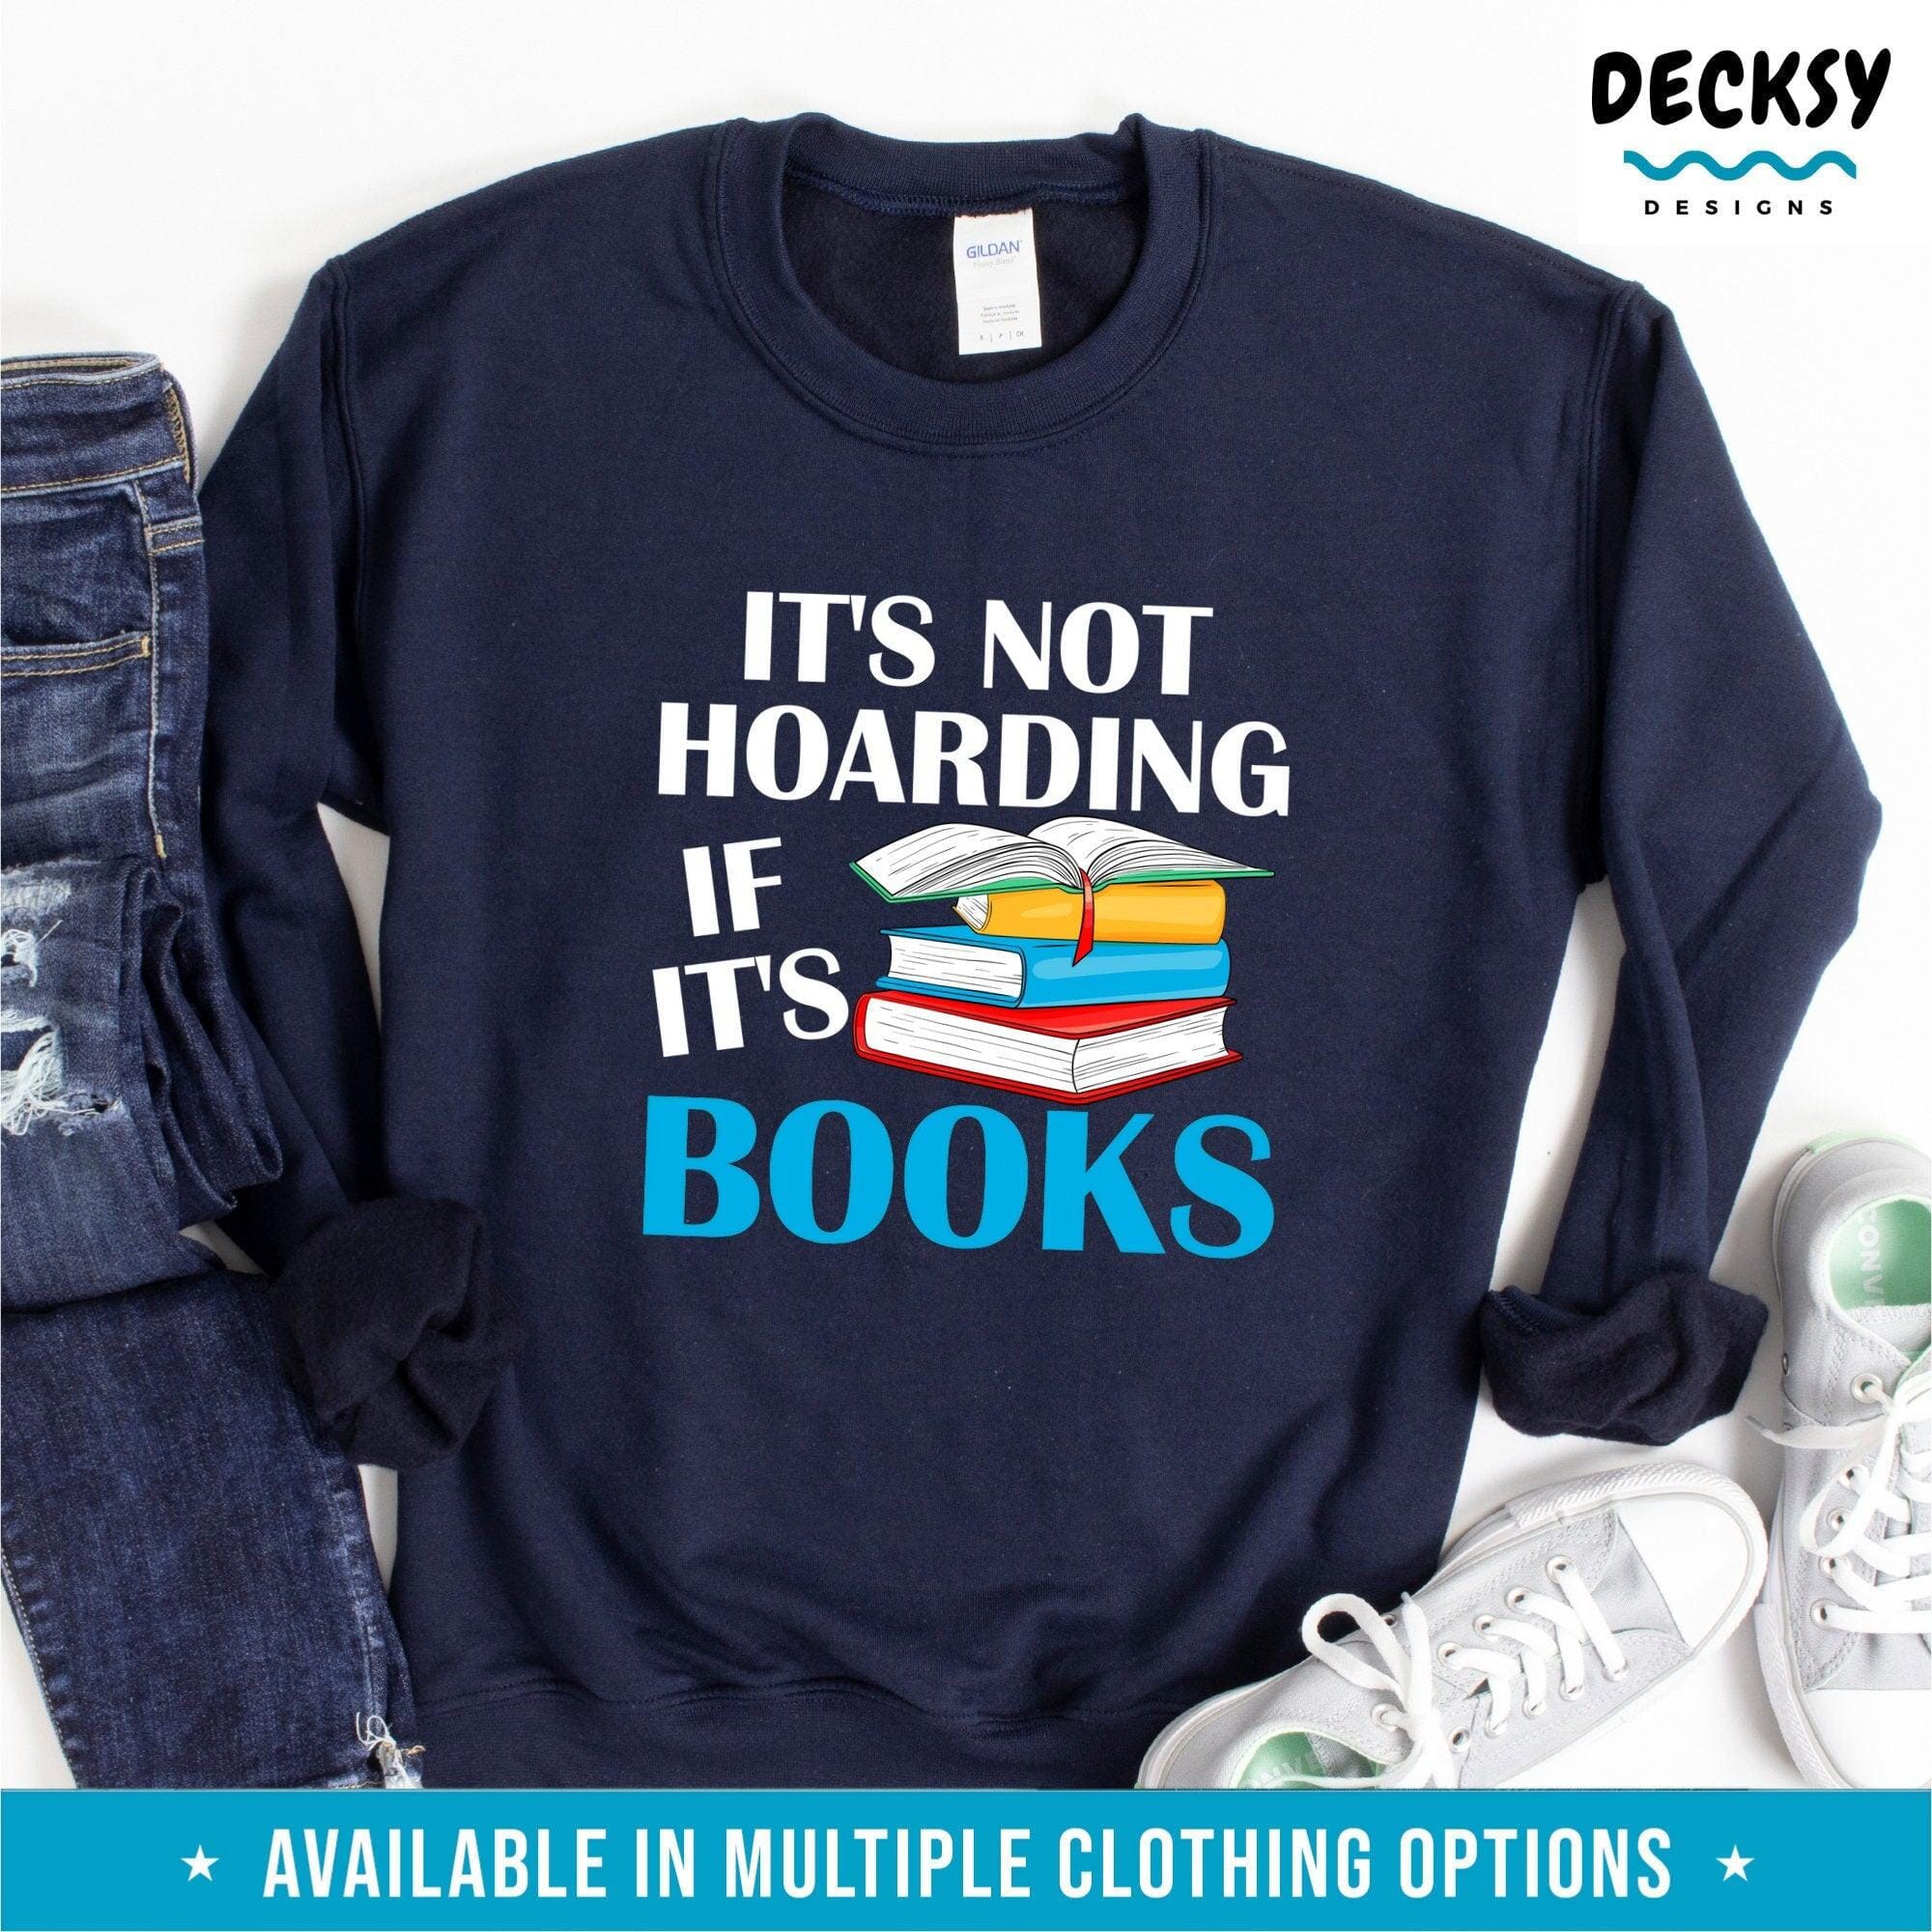 Bookish Shirt, Reader Gift-Clothing:Gender-Neutral Adult Clothing:Tops & Tees:T-shirts:Graphic Tees-DecksyDesigns